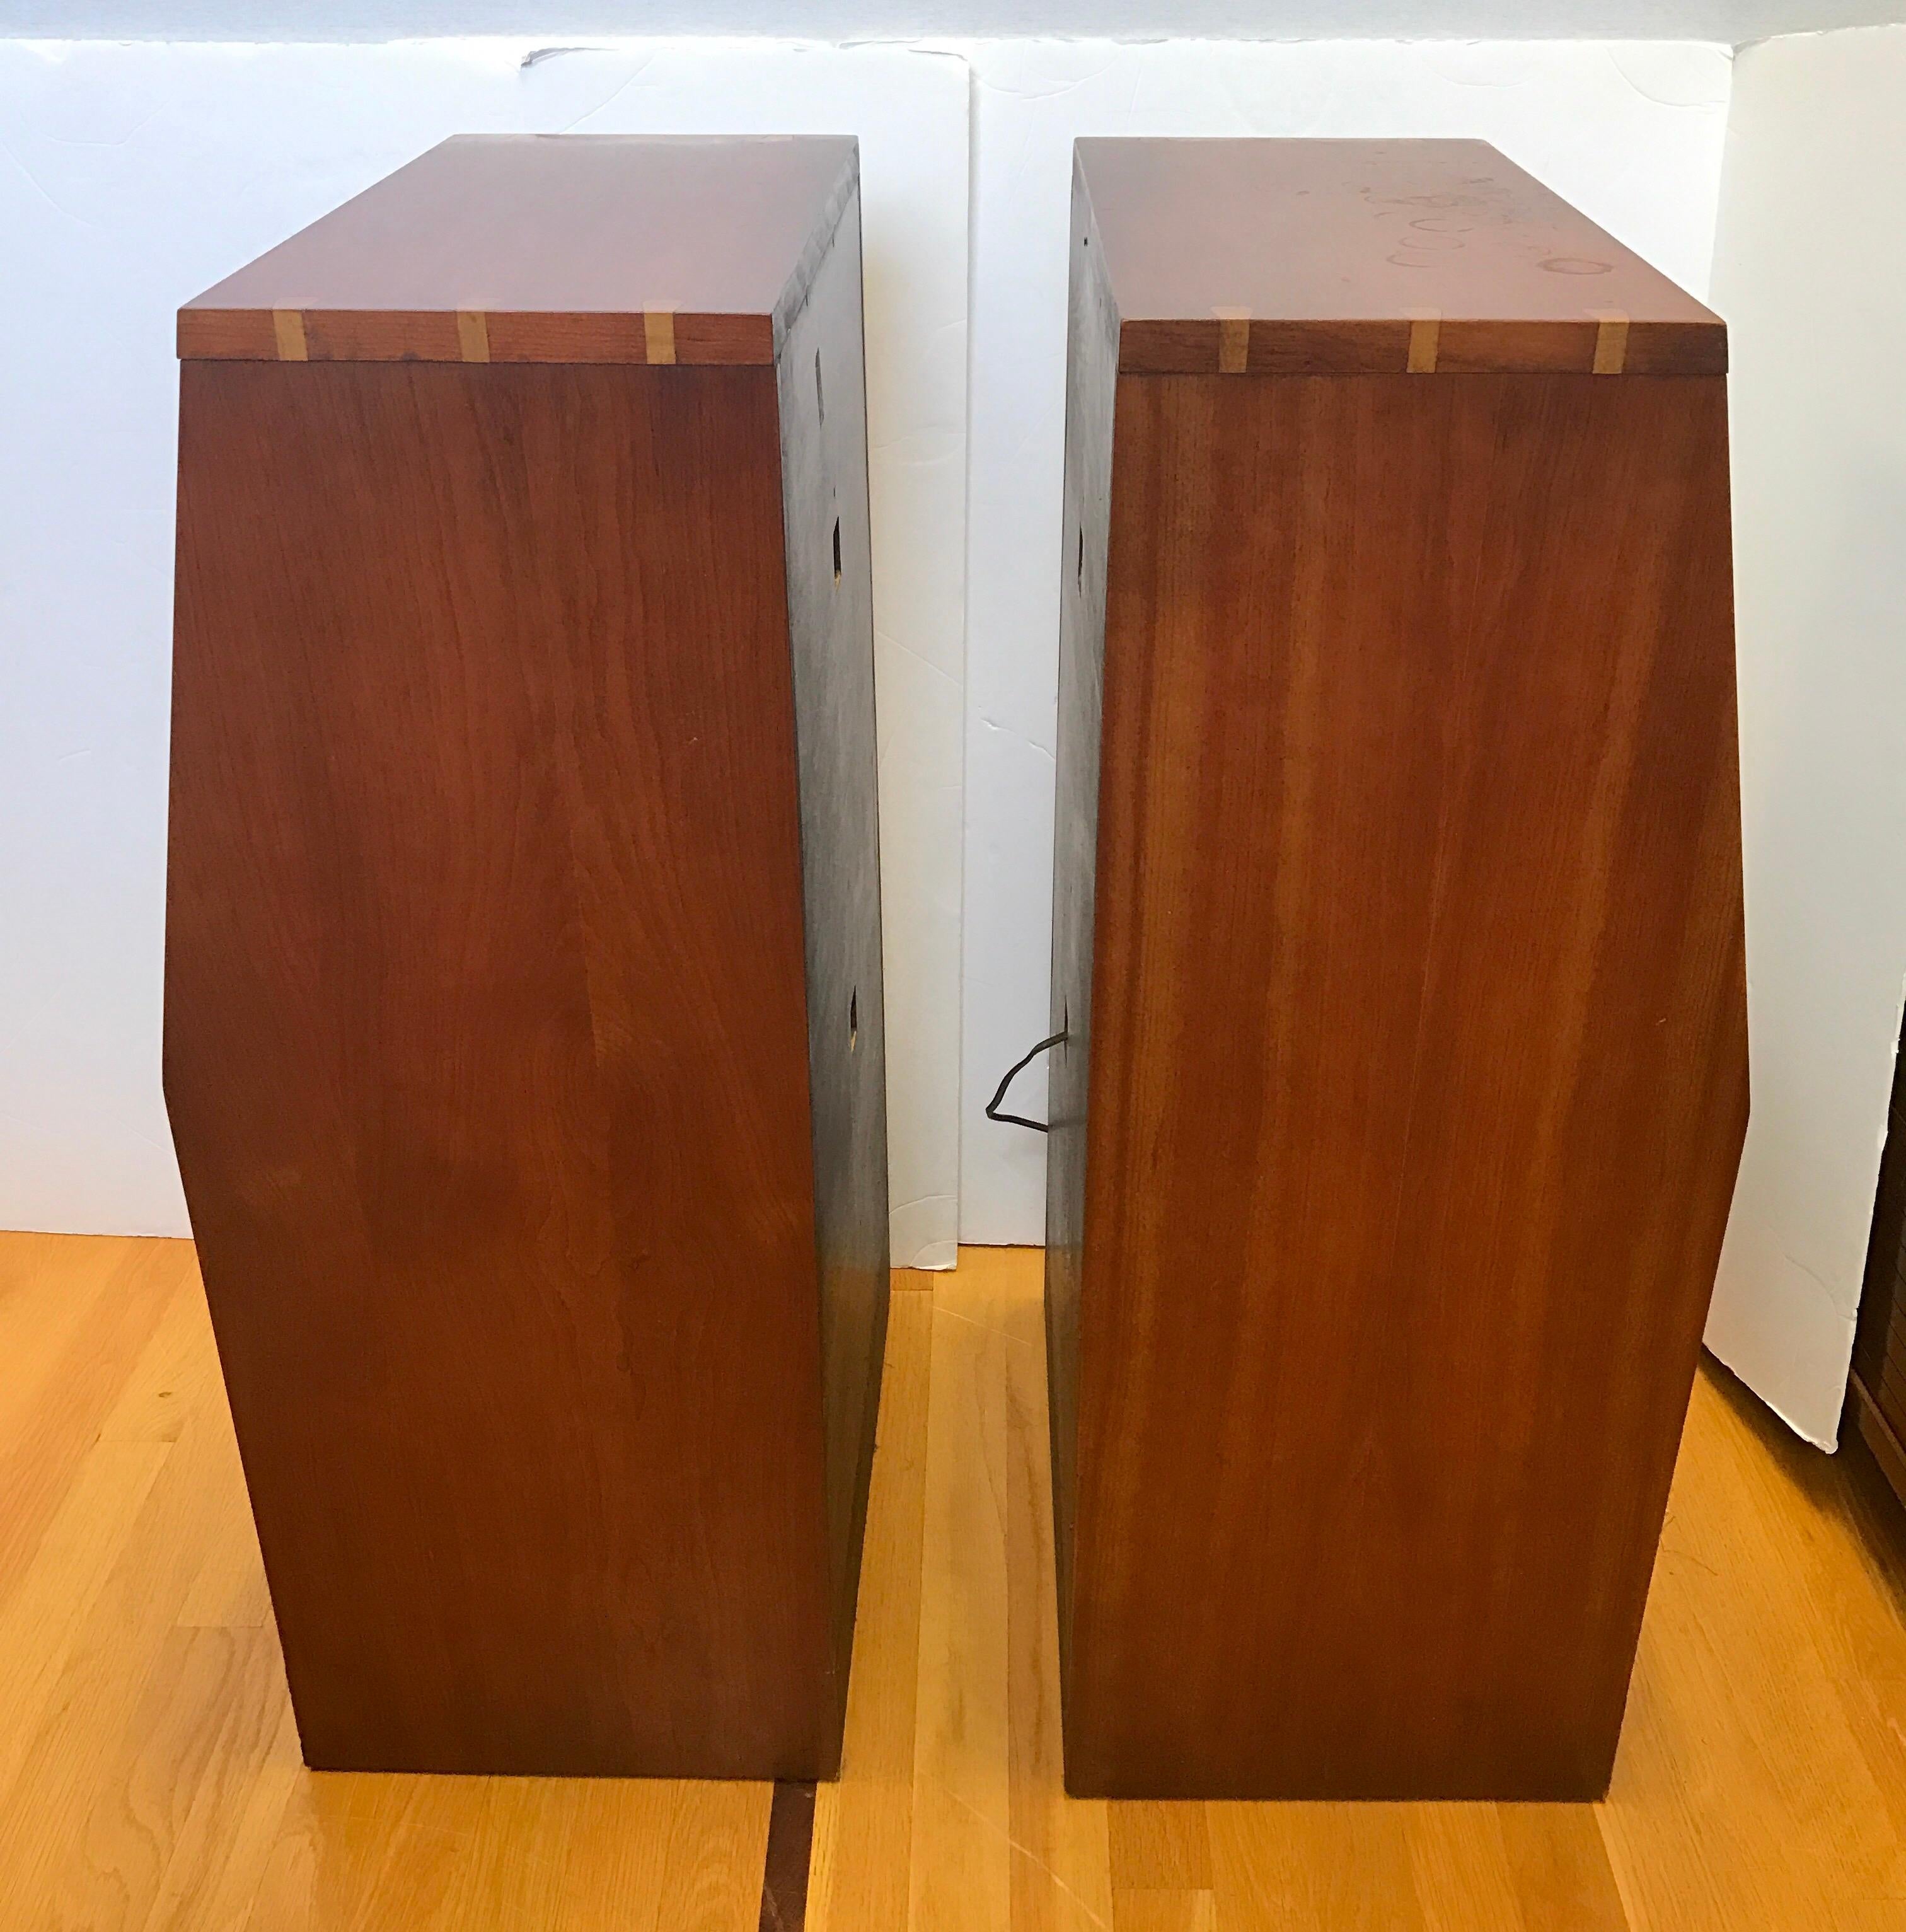 Rare pair of matching signed Henredon Heritage midcentury nightstands, end tables done in walnut.